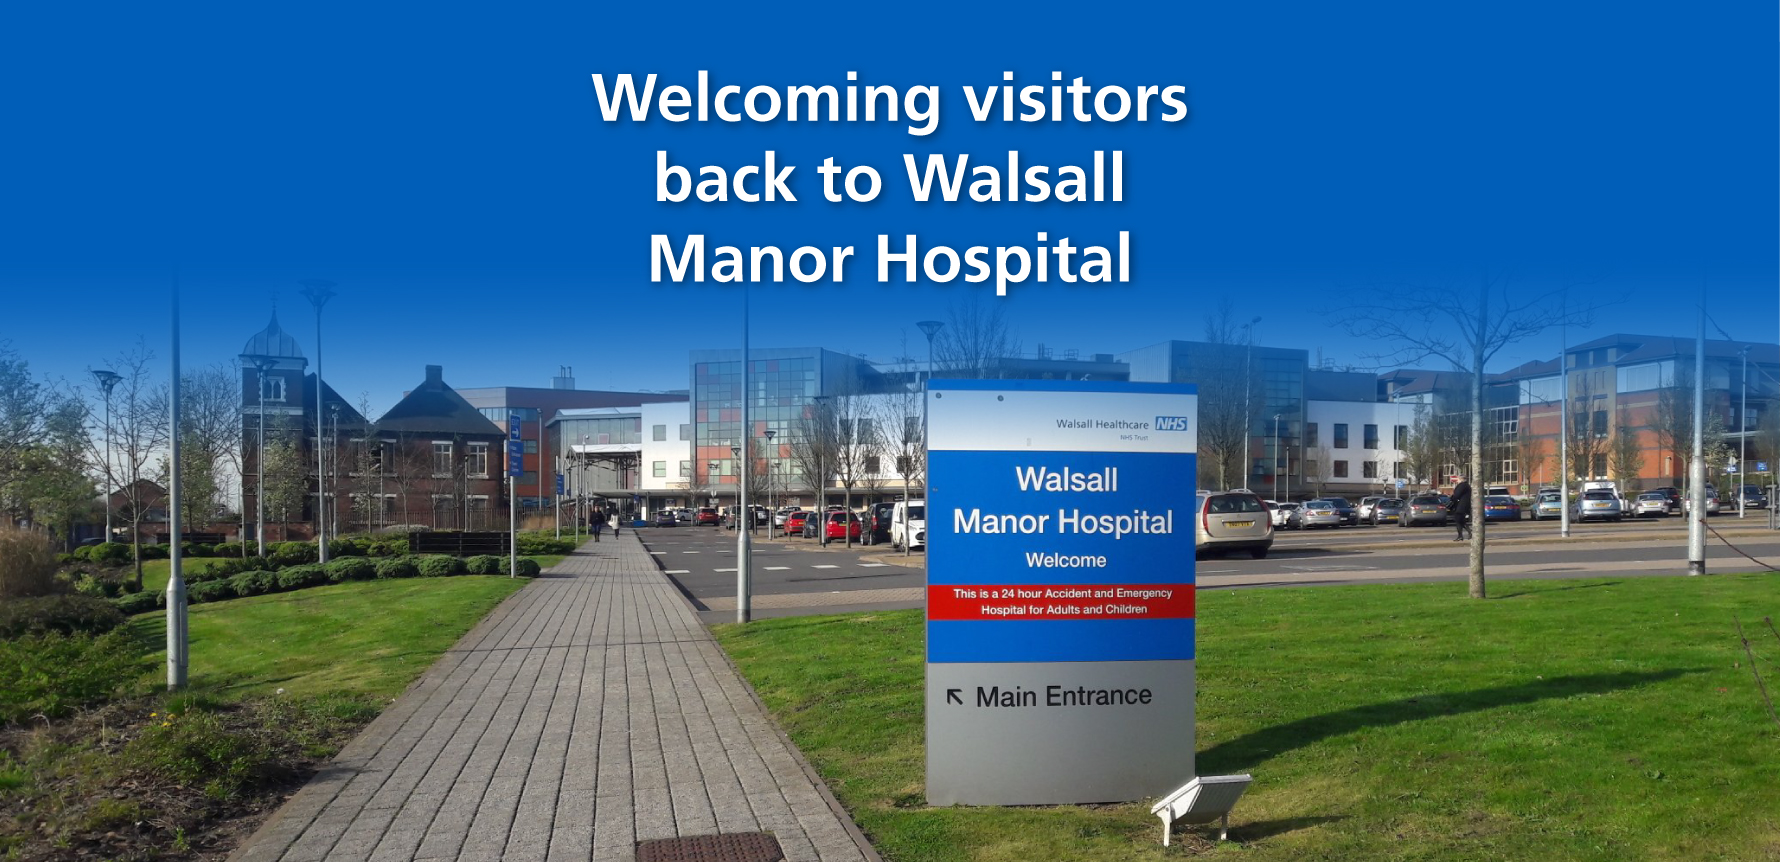 Welcoming Visitors back to Walsall Manor Hospital